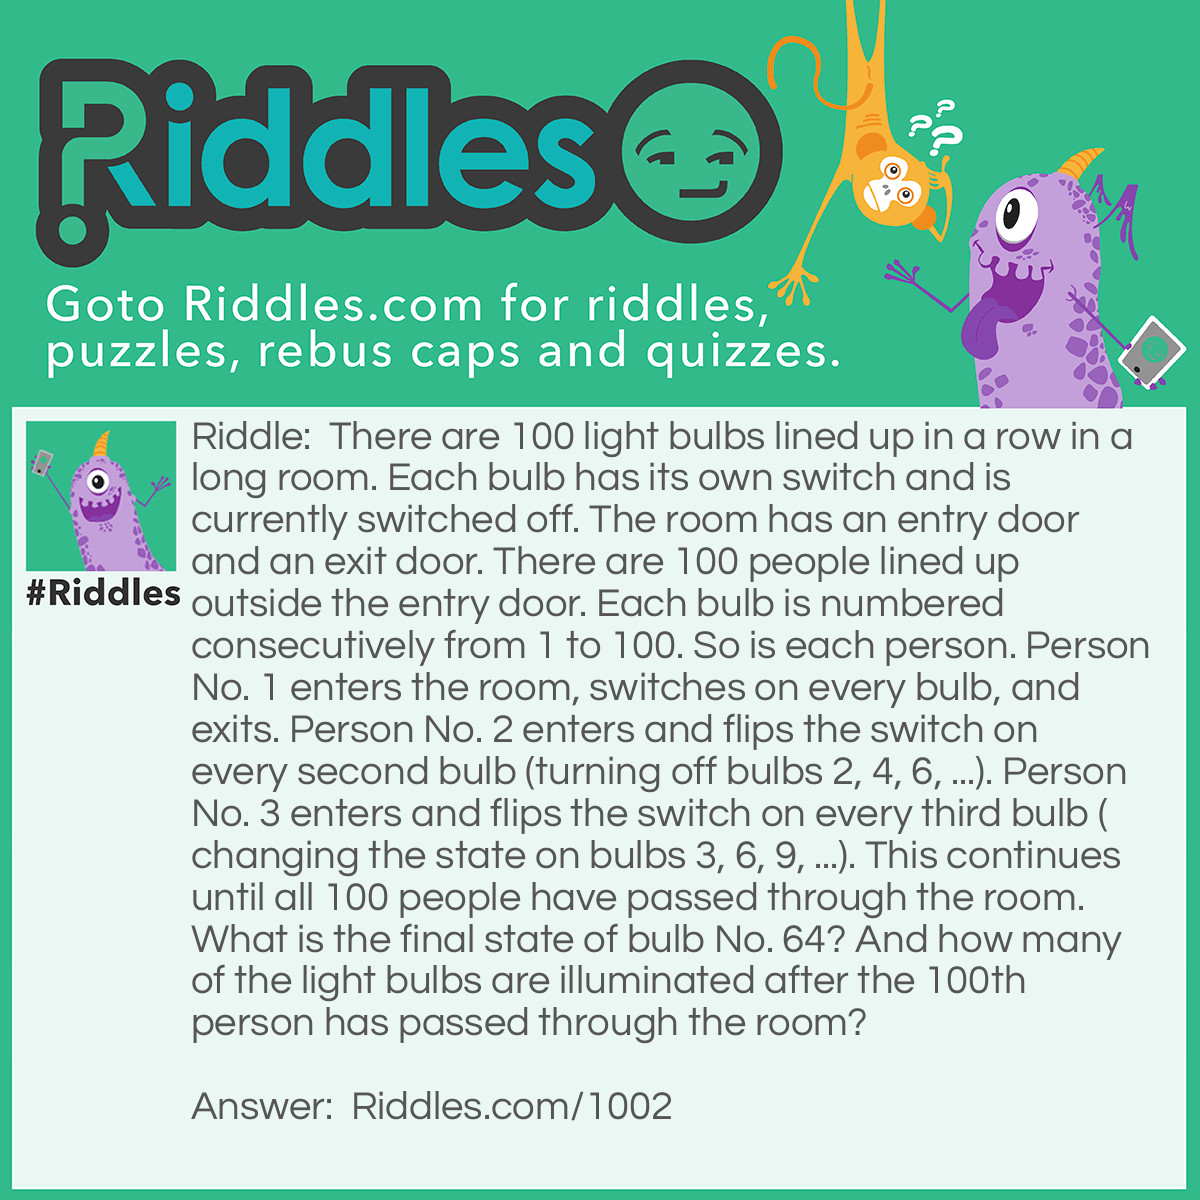 Riddle: There are 100 light bulbs lined up in a row in a long room. Each bulb has its own switch and is currently switched off. The room has an entry door and an exit door. There are 100 people lined up outside the entry door. Each bulb is numbered consecutively from 1 to 100. So is each person. Person No. 1 enters the room, switches on every bulb, and exits. Person No. 2 enters and flips the switch on every second bulb (turning off bulbs 2, 4, 6, ...). Person No. 3 enters and flips the switch on every third bulb (changing the state on bulbs 3, 6, 9, ...). This continues until all 100 people have passed through the room. What is the final state of bulb No. 64? And how many of the light bulbs are illuminated after the 100th person has passed through the room? Answer: First think who will operate each bulb, obviously person #2 will do all the even numbers, and say person #10 will operate all the bulbs that end in a zero. So who would operate for example bulb 48: Persons numbered: 1 & 48, 2 & 24, 3 & 16, 4 & 12, 6 & 8 ........ That is all the factors (numbers by which 48 is divisible) will be in pairs. This means that for every person who switches a bulb on there will be someone to switch it off. This willl result in the bulb being back at it's original state. So why aren't all the bulbs off? Think of bulb 36:- The factors are: 1 & 36, 2 & 13, 6 & 6 Well in this case whilst all the factors are in pairs the number 6 is paired with it's self. Clearly the sixth person will only flick the bulb once and so the pairs don't cancel. This is true of all the square numbers. There are 10 square numbers between 1 and 100 (1, 4, 9, 16, 25, 36, 49, 64, 81 & 100) hence 10 bulbs remain on.